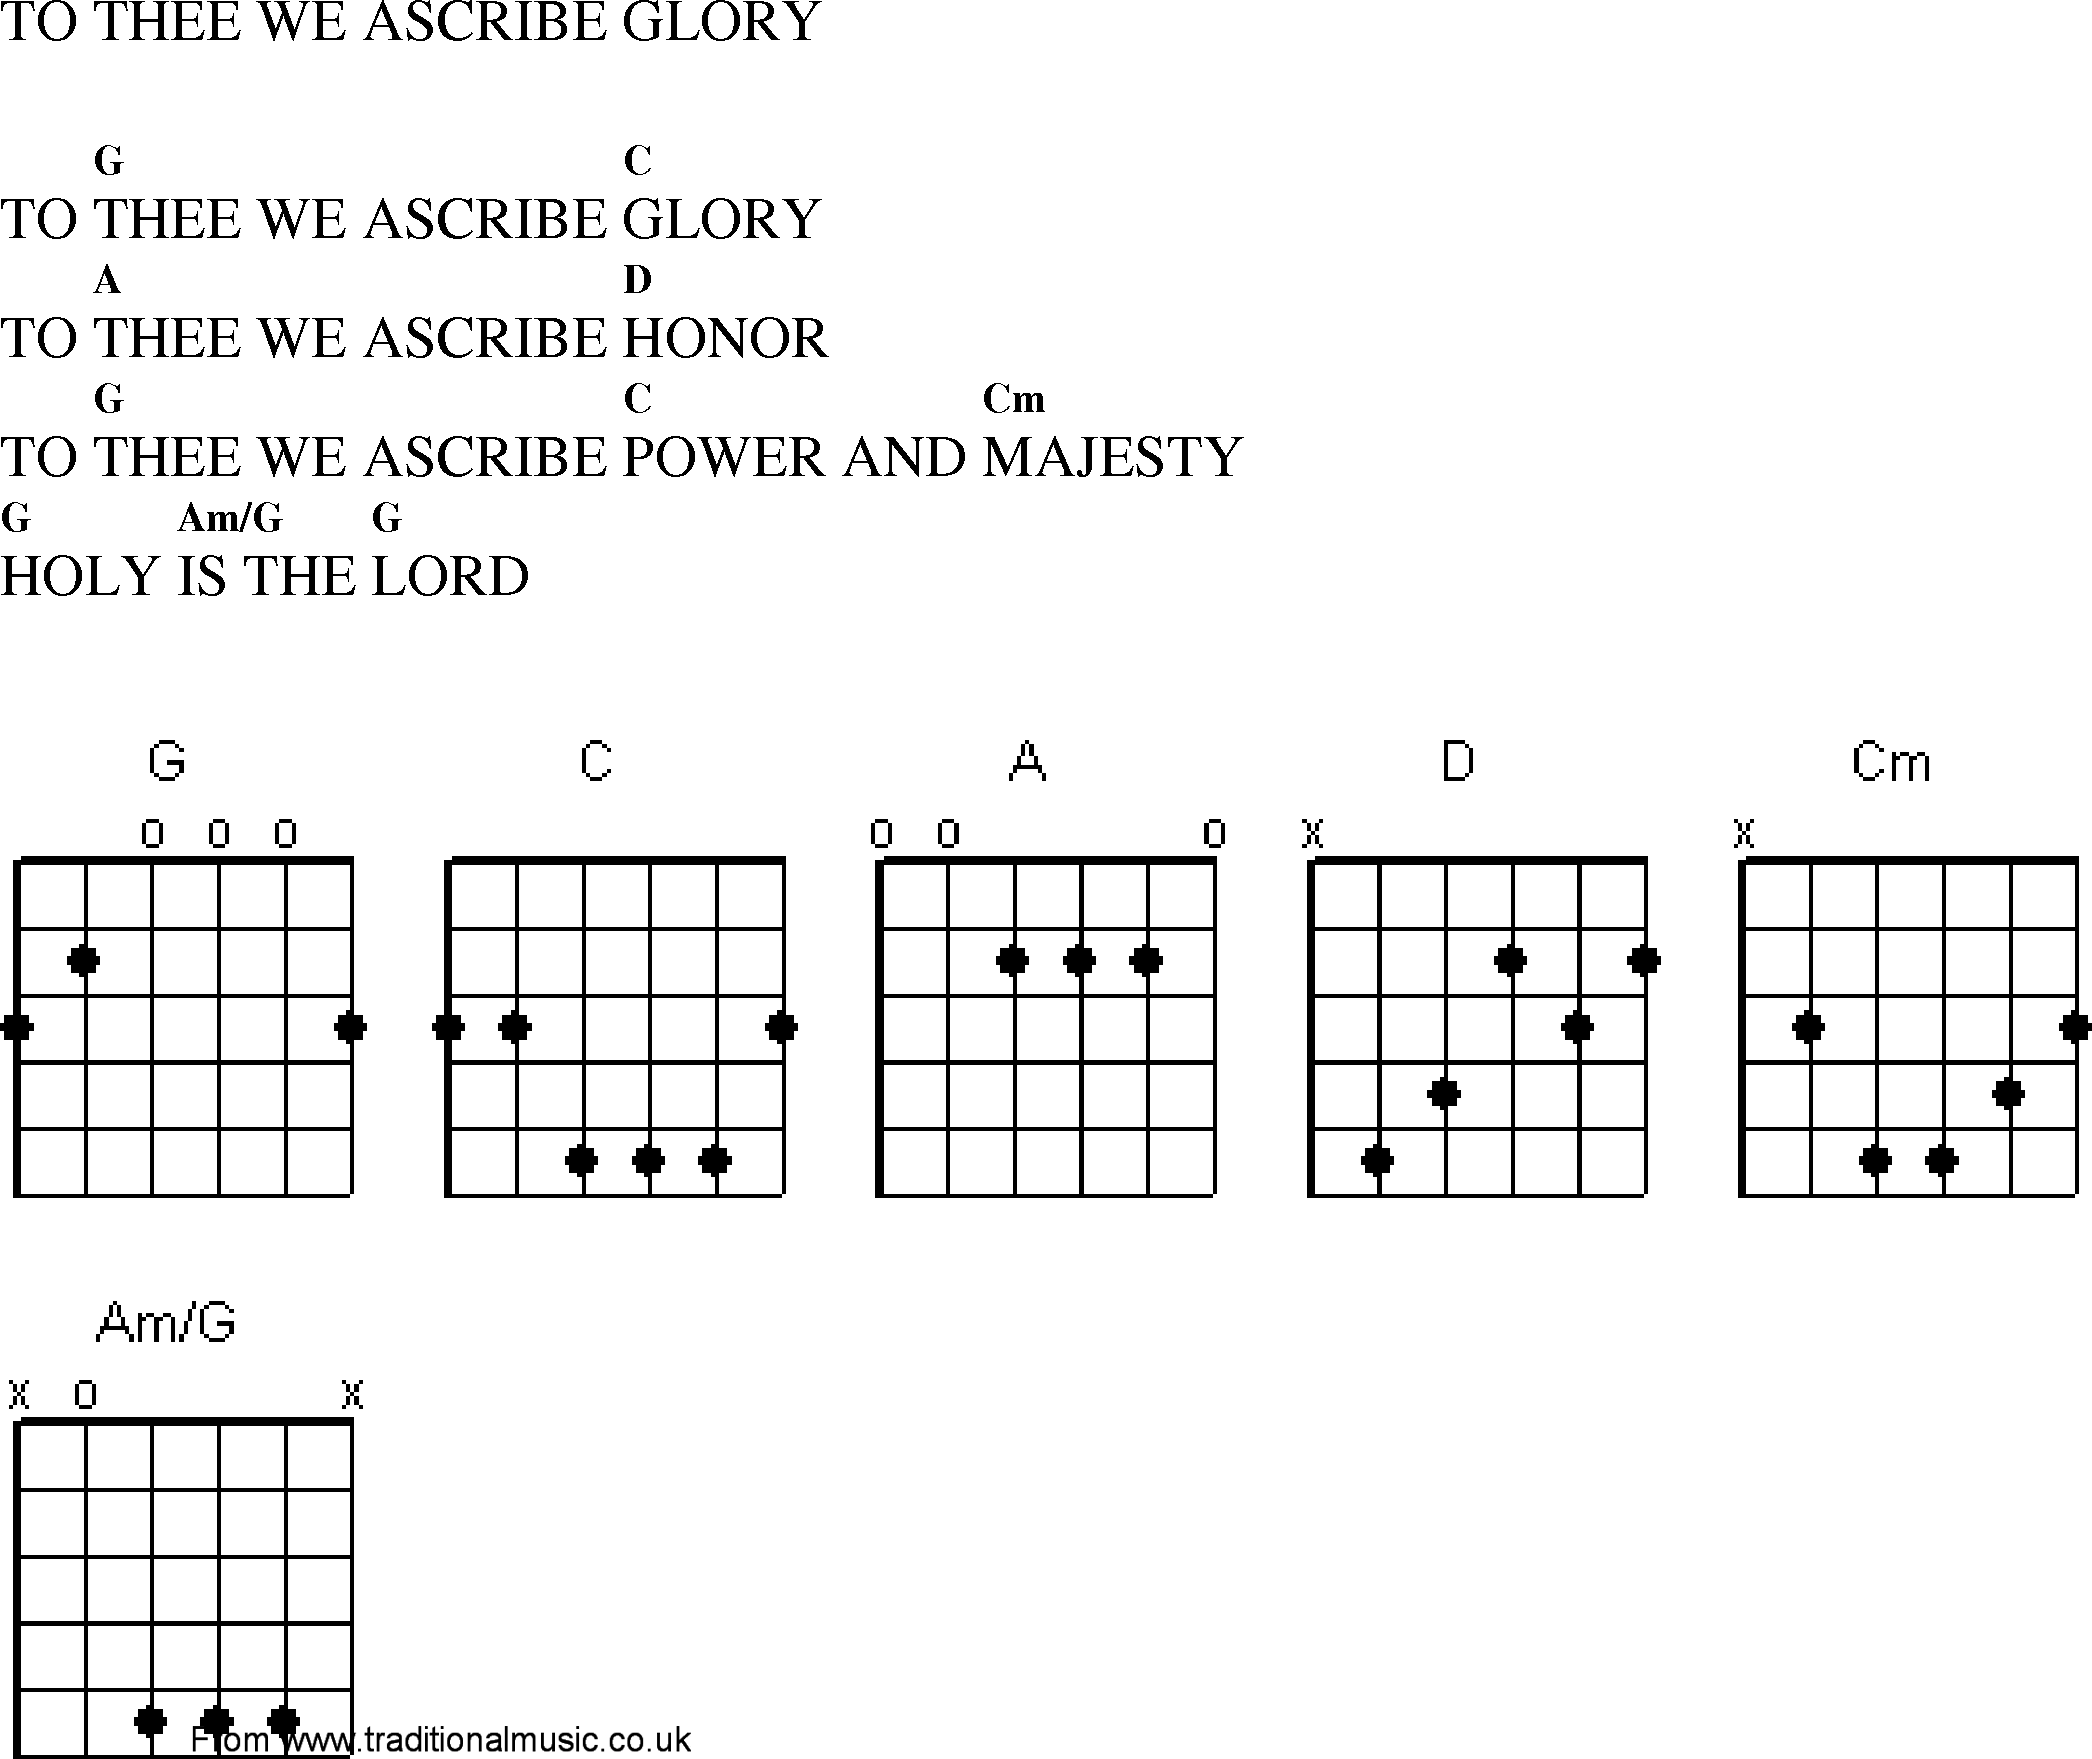 Gospel Song: to_thee_we_ascribe_glory, lyrics and chords.